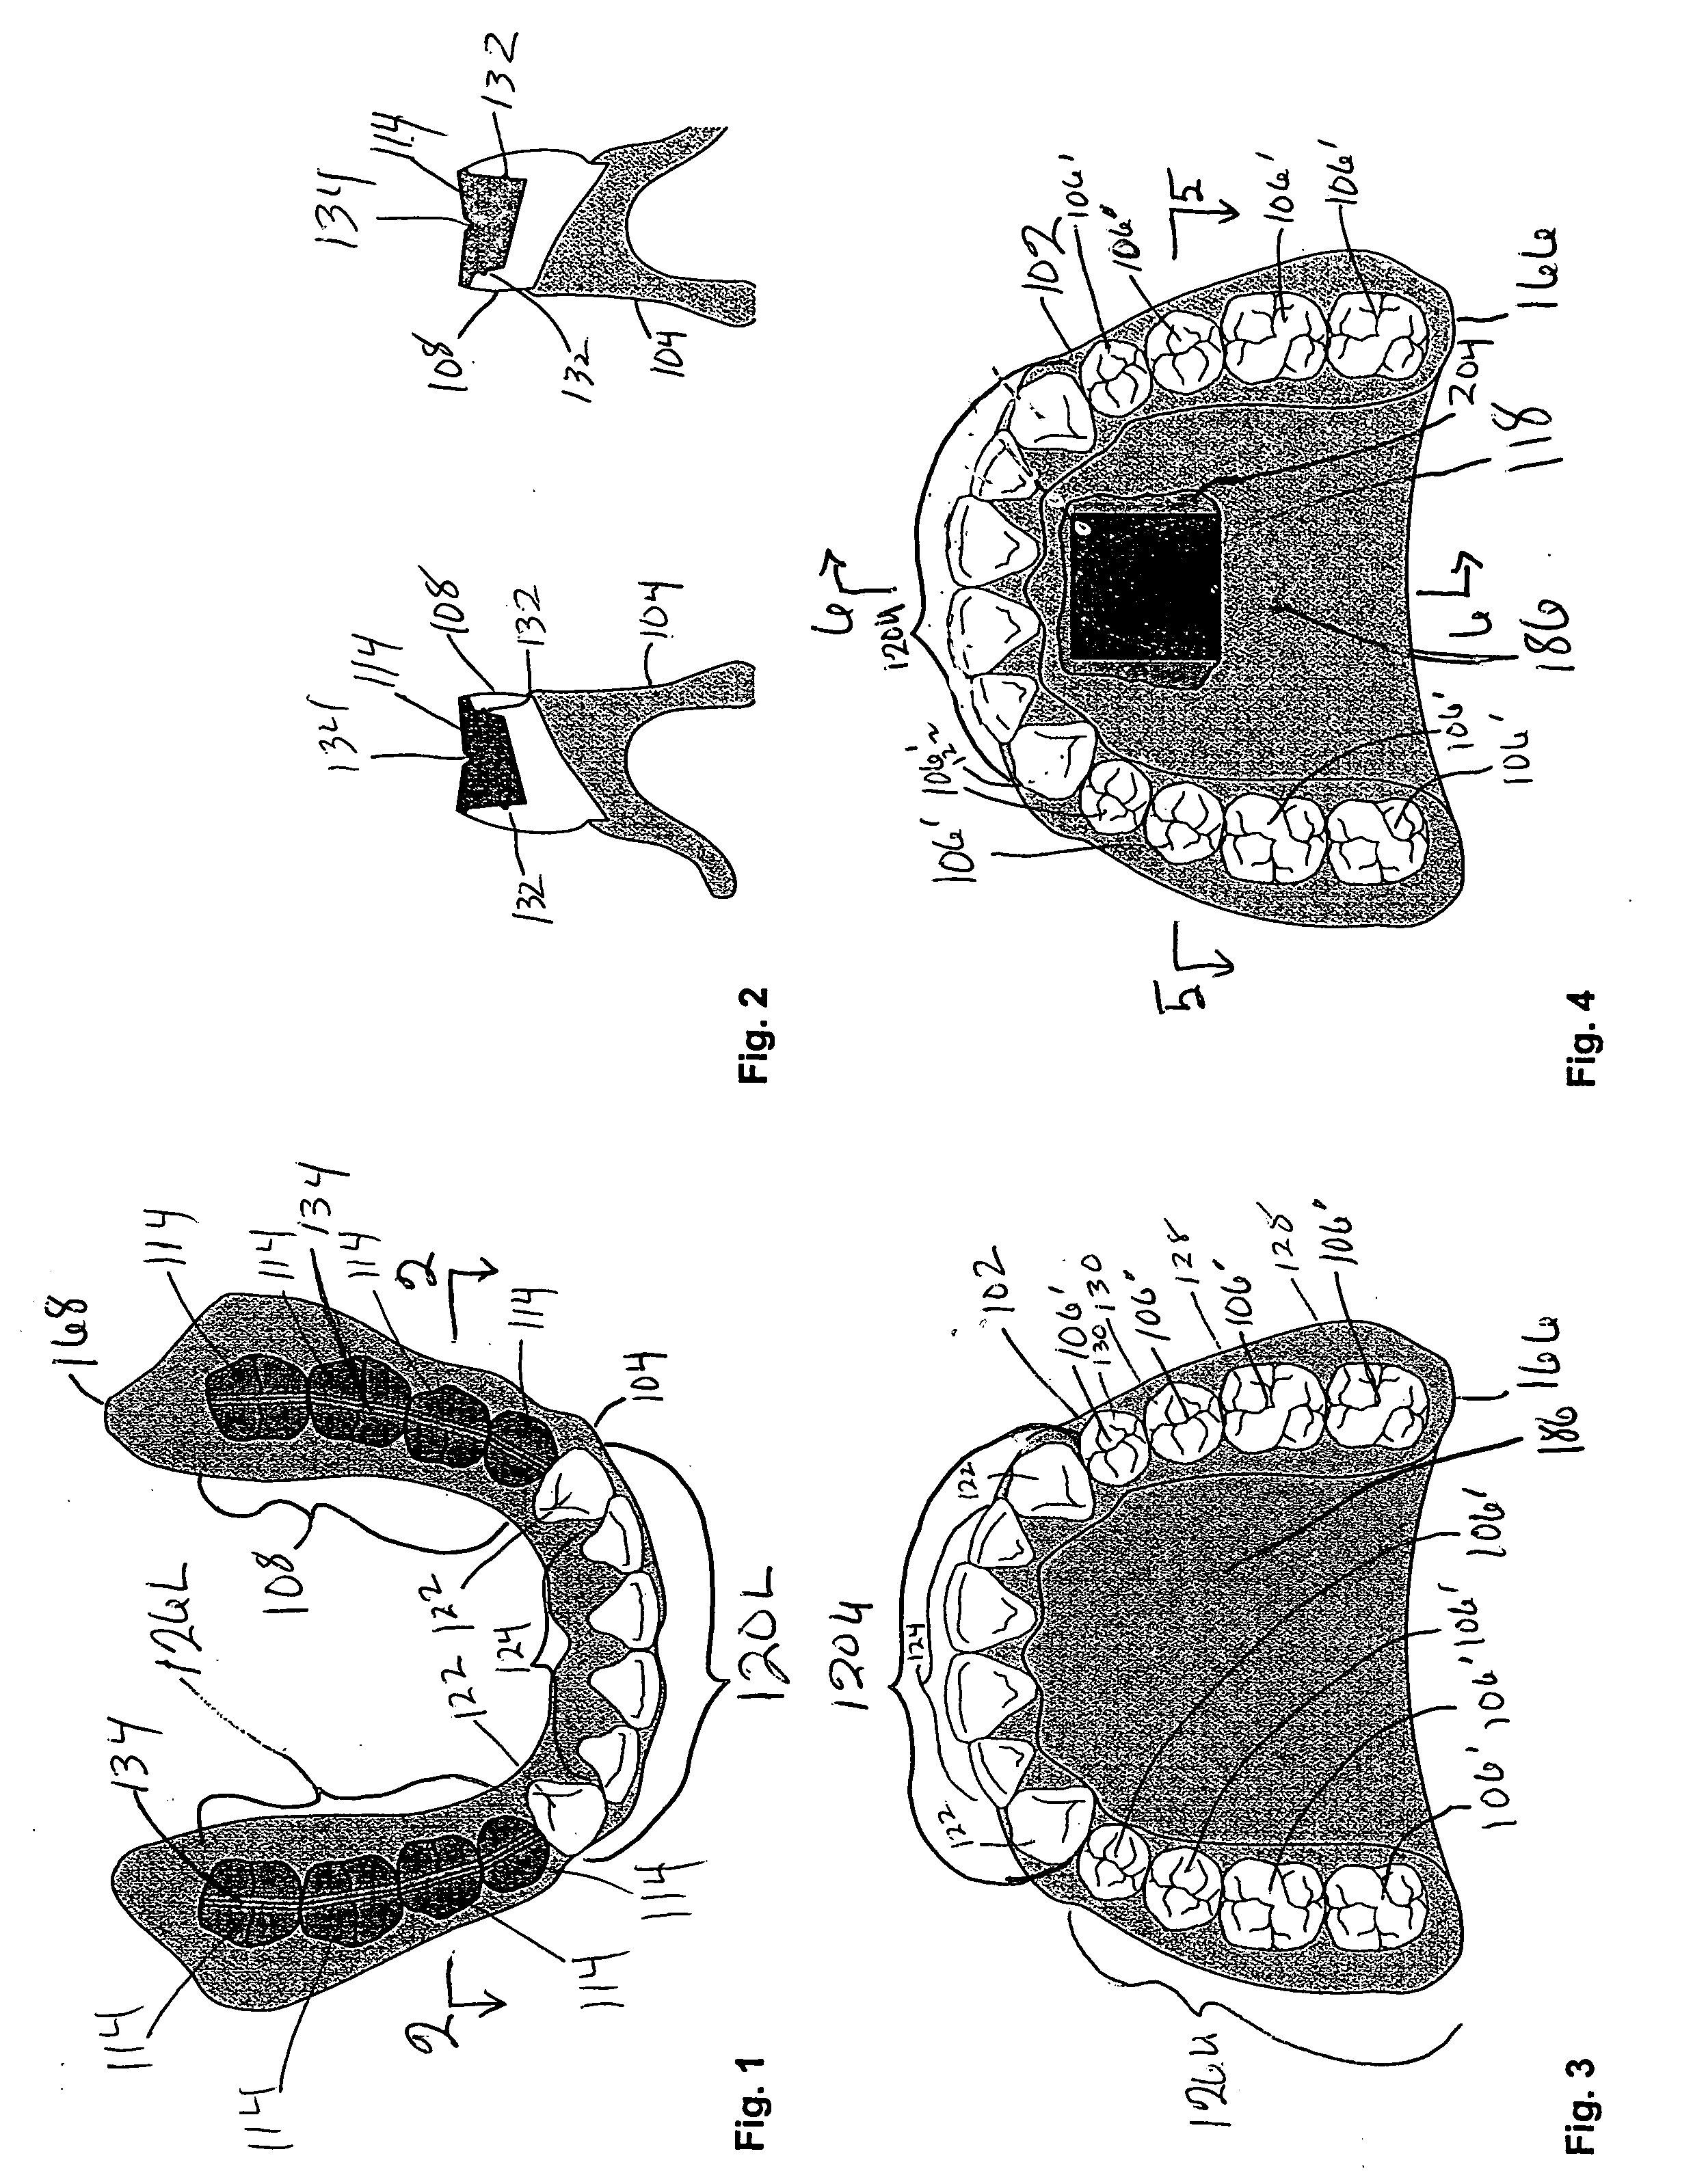 Method for developing balanced occlusion in dentistry